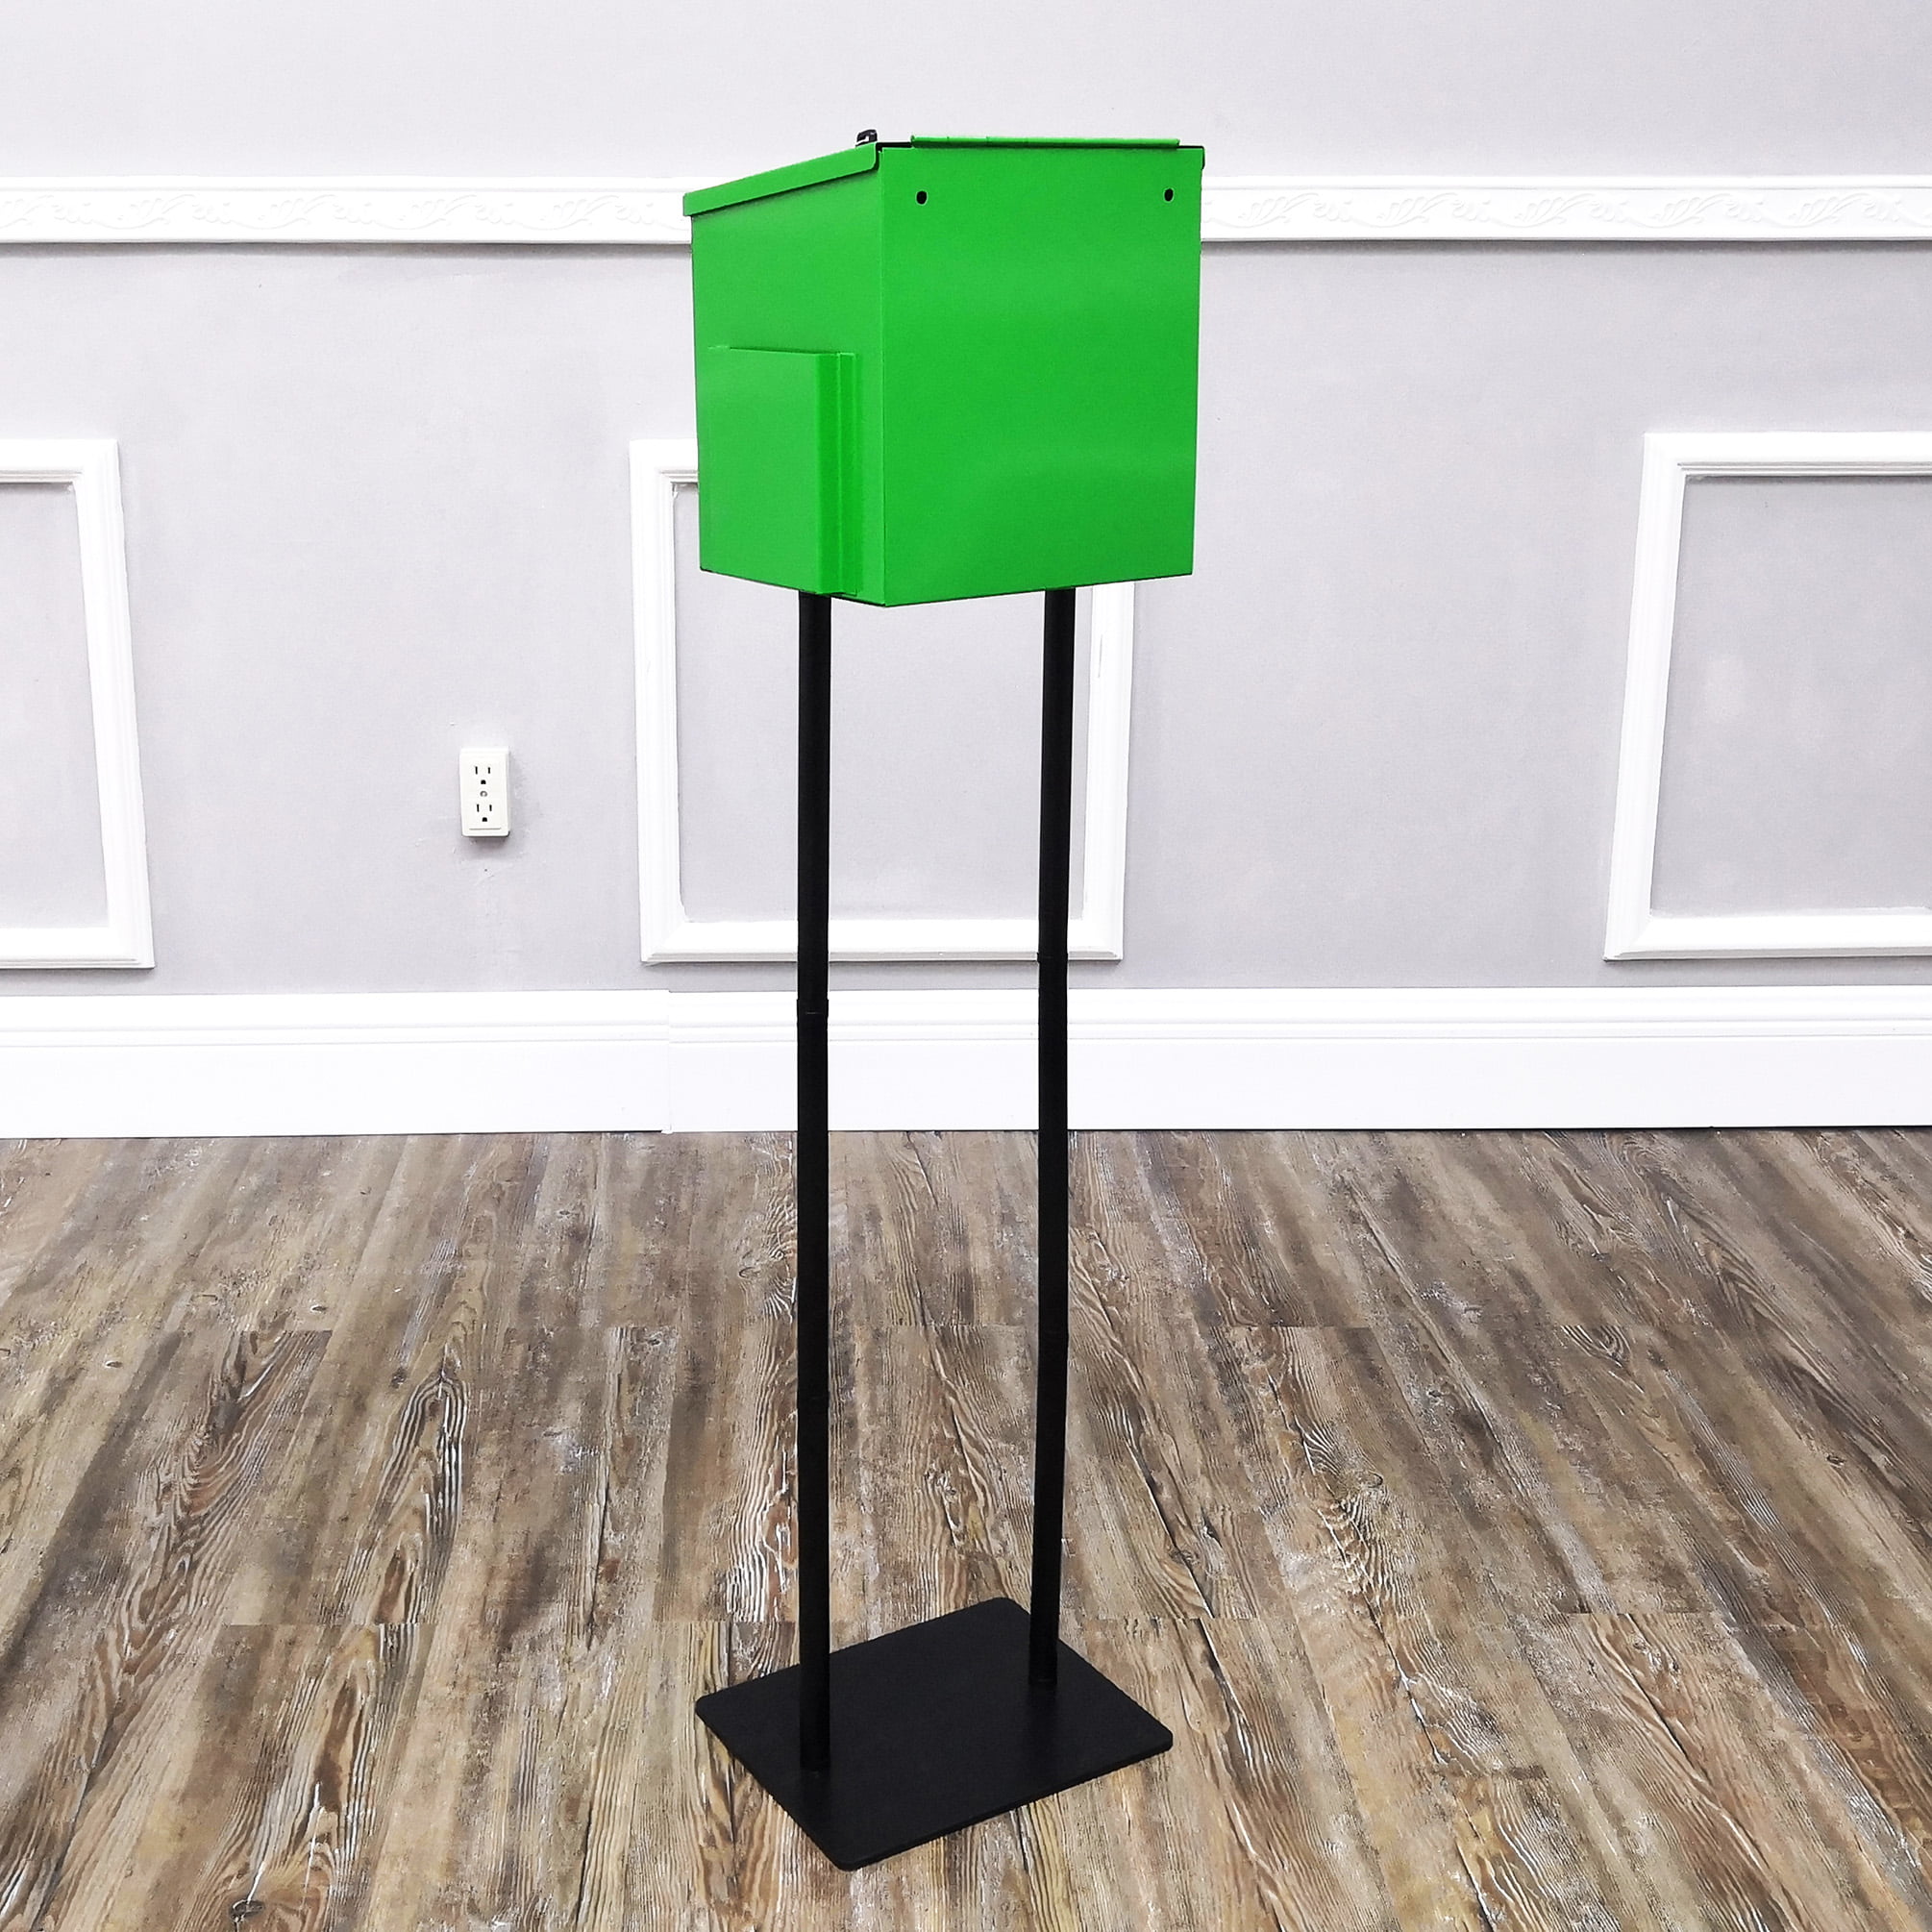 Fixturedisplays Metal Donation Poster Stand Suggestion Box Charity4 Fundraising Tithes Offering 11063+10918-GREEN